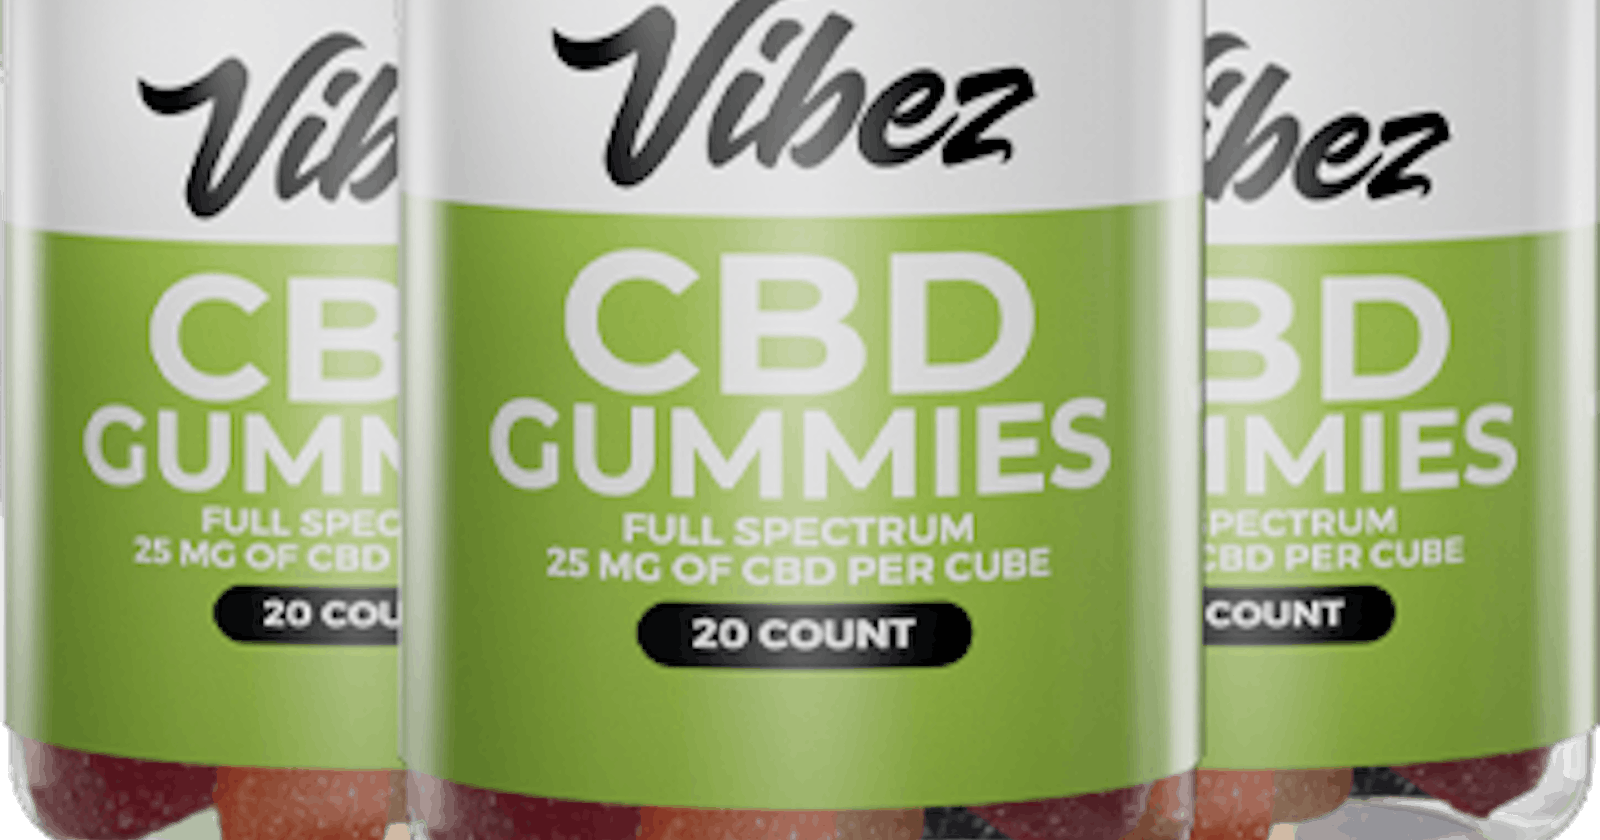 Vibez CBD Gummies Review : Myths And Facts Revealed!